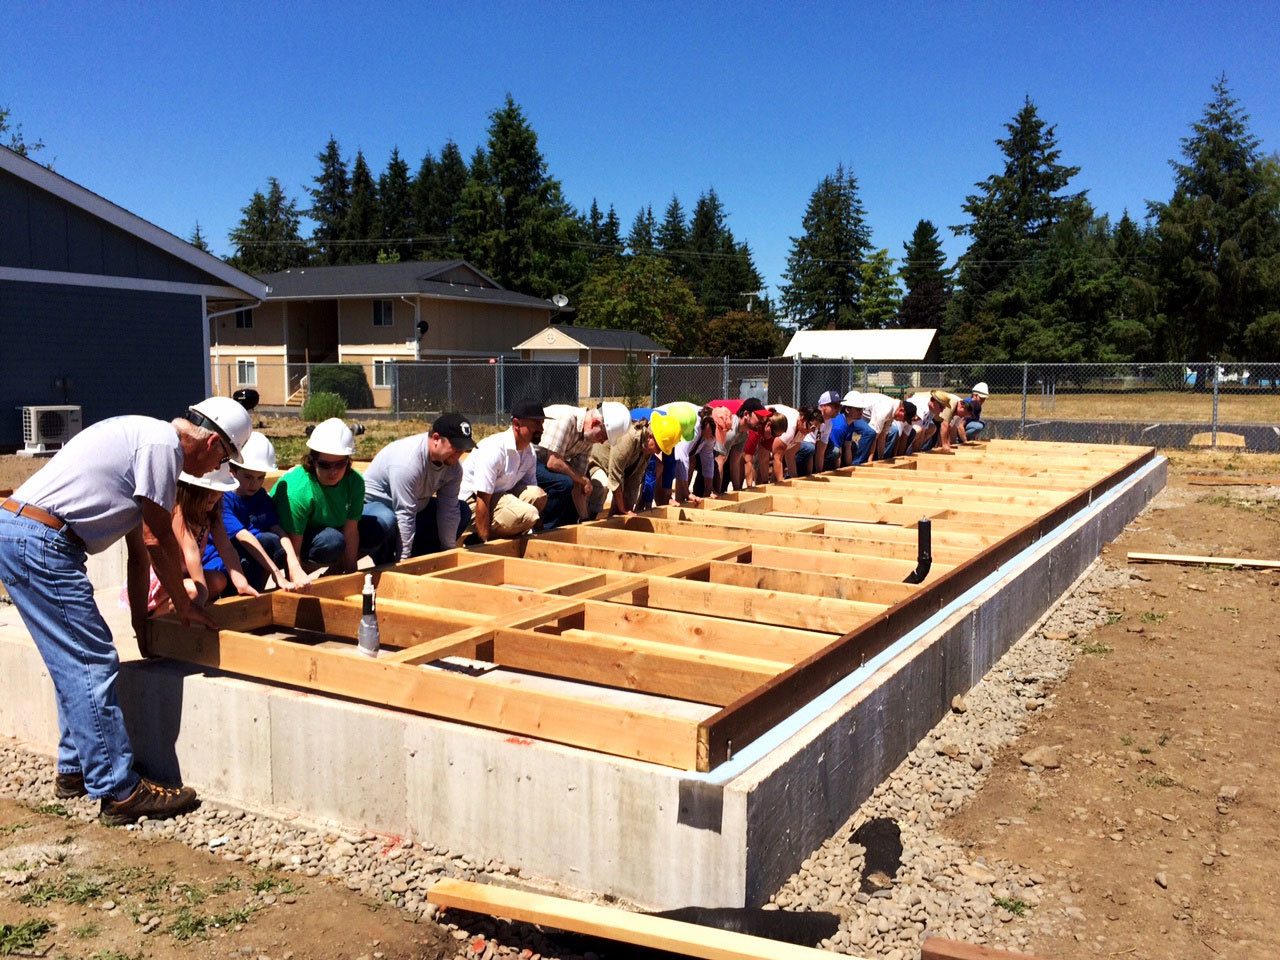 Habitat for Humanity of Clallam County works on building a house in Forks. Habitat has announced it will be taking a two-year hiatus from serving Forks and focusing on a neighborhood revitalization program. (Habitat for Humanity)